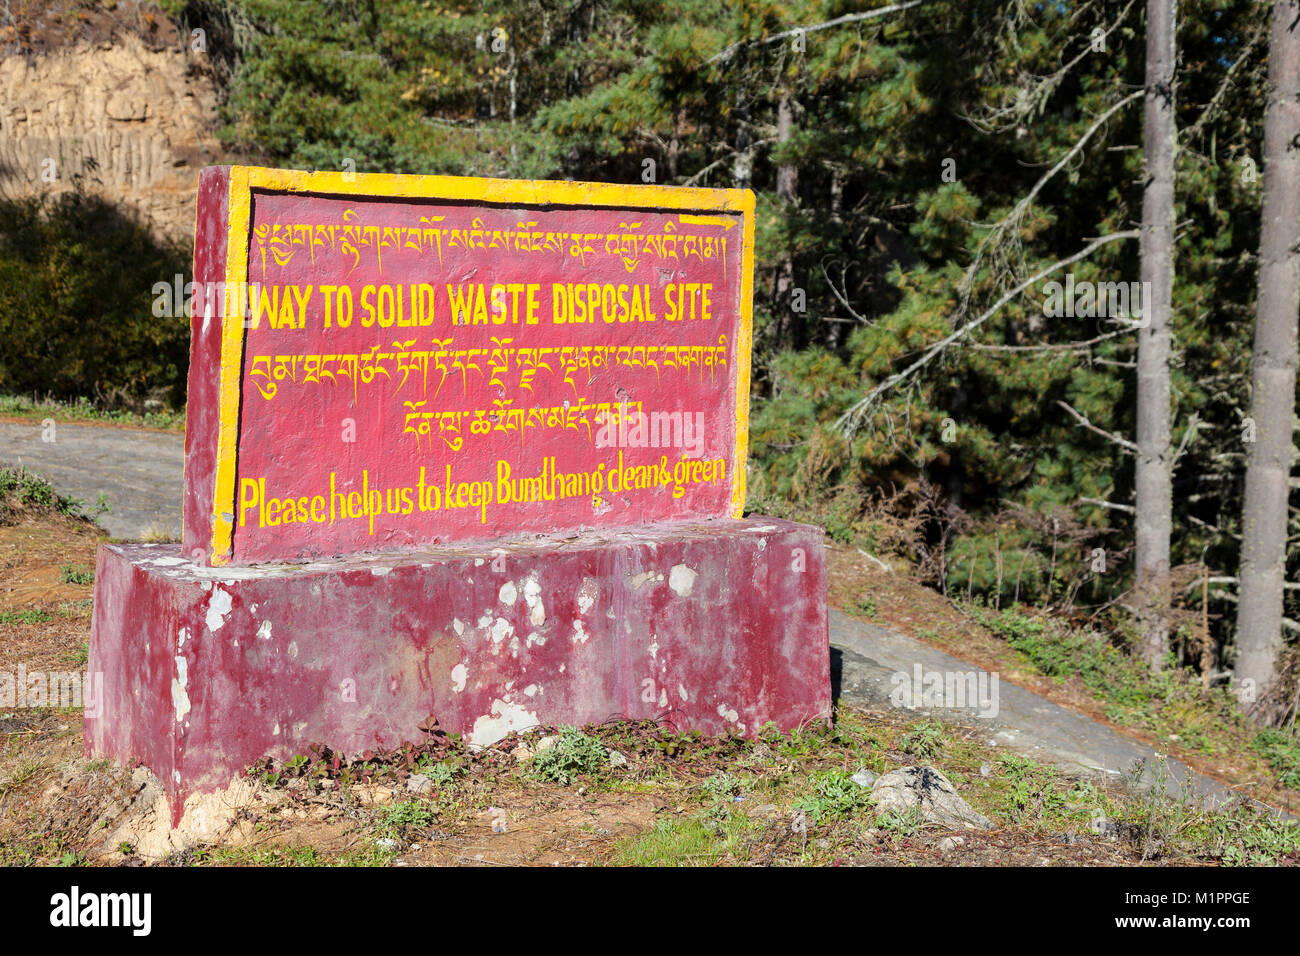 Bumthang, Bhutan.  Keep Bumthang  Clean and Green.  Sign to Solid waste Disposal Site. Stock Photo